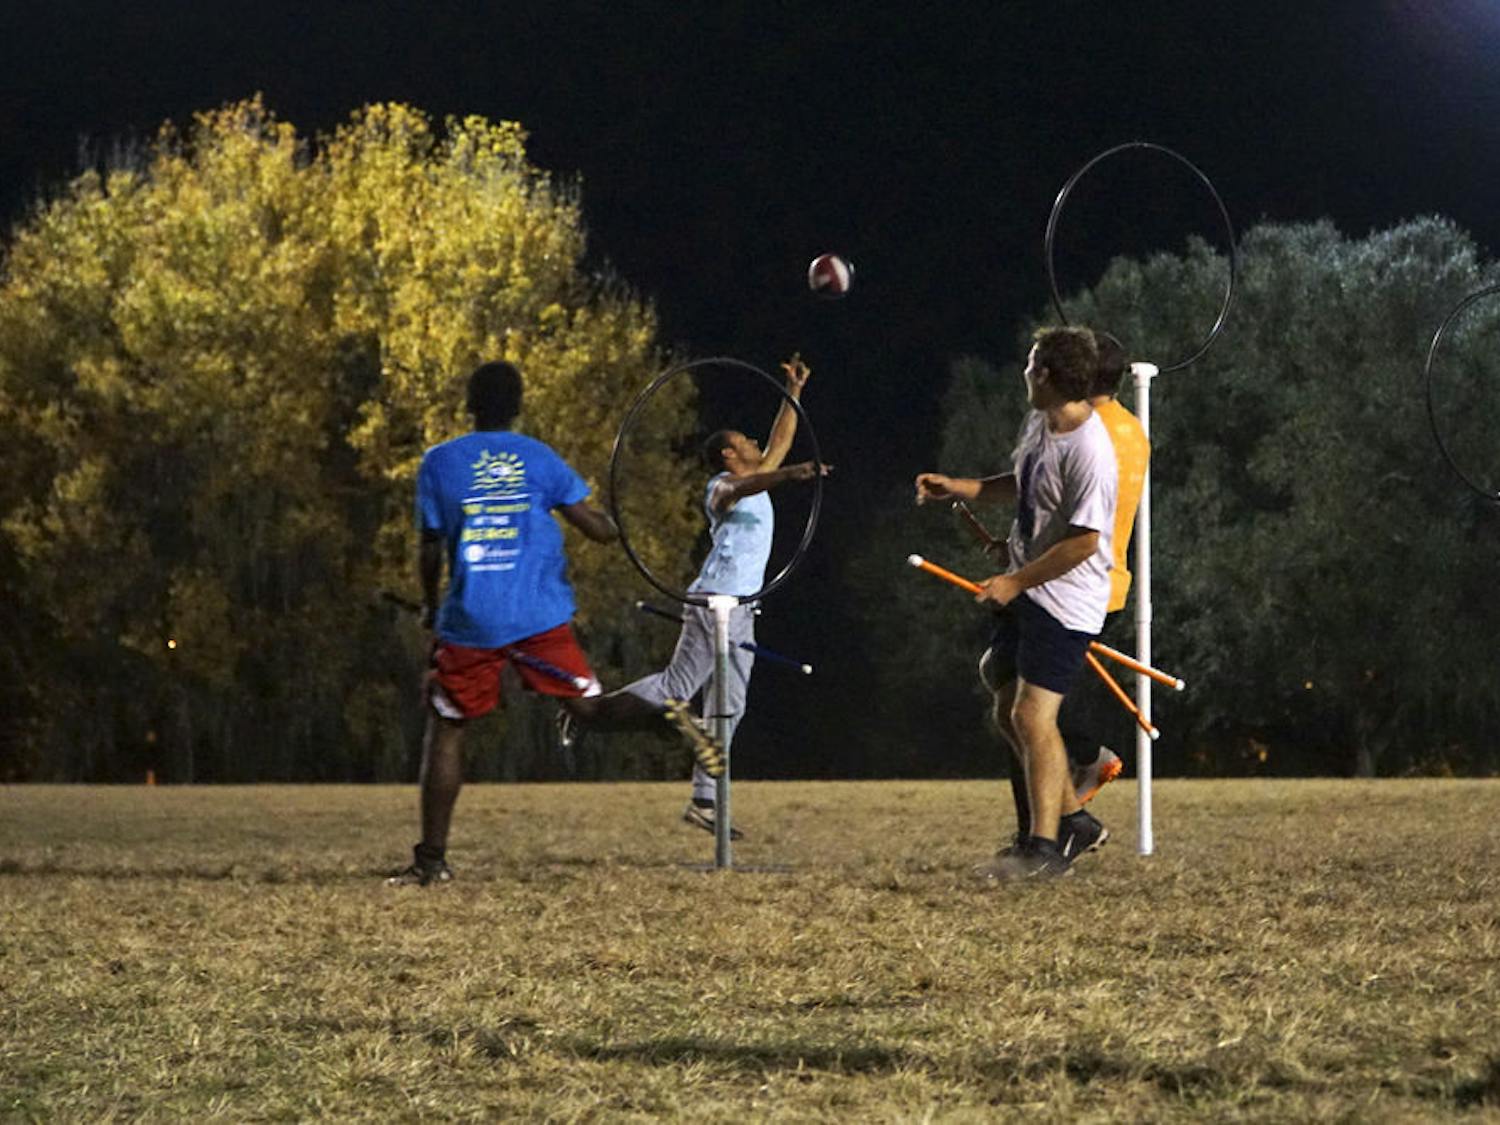 UF’s Quidditch club meets every Sunday and Wednesday from 7 p.m. to 9 p.m. at Flavet Field for scrimmage games. The team is currently training for the regional tournament next weekend.